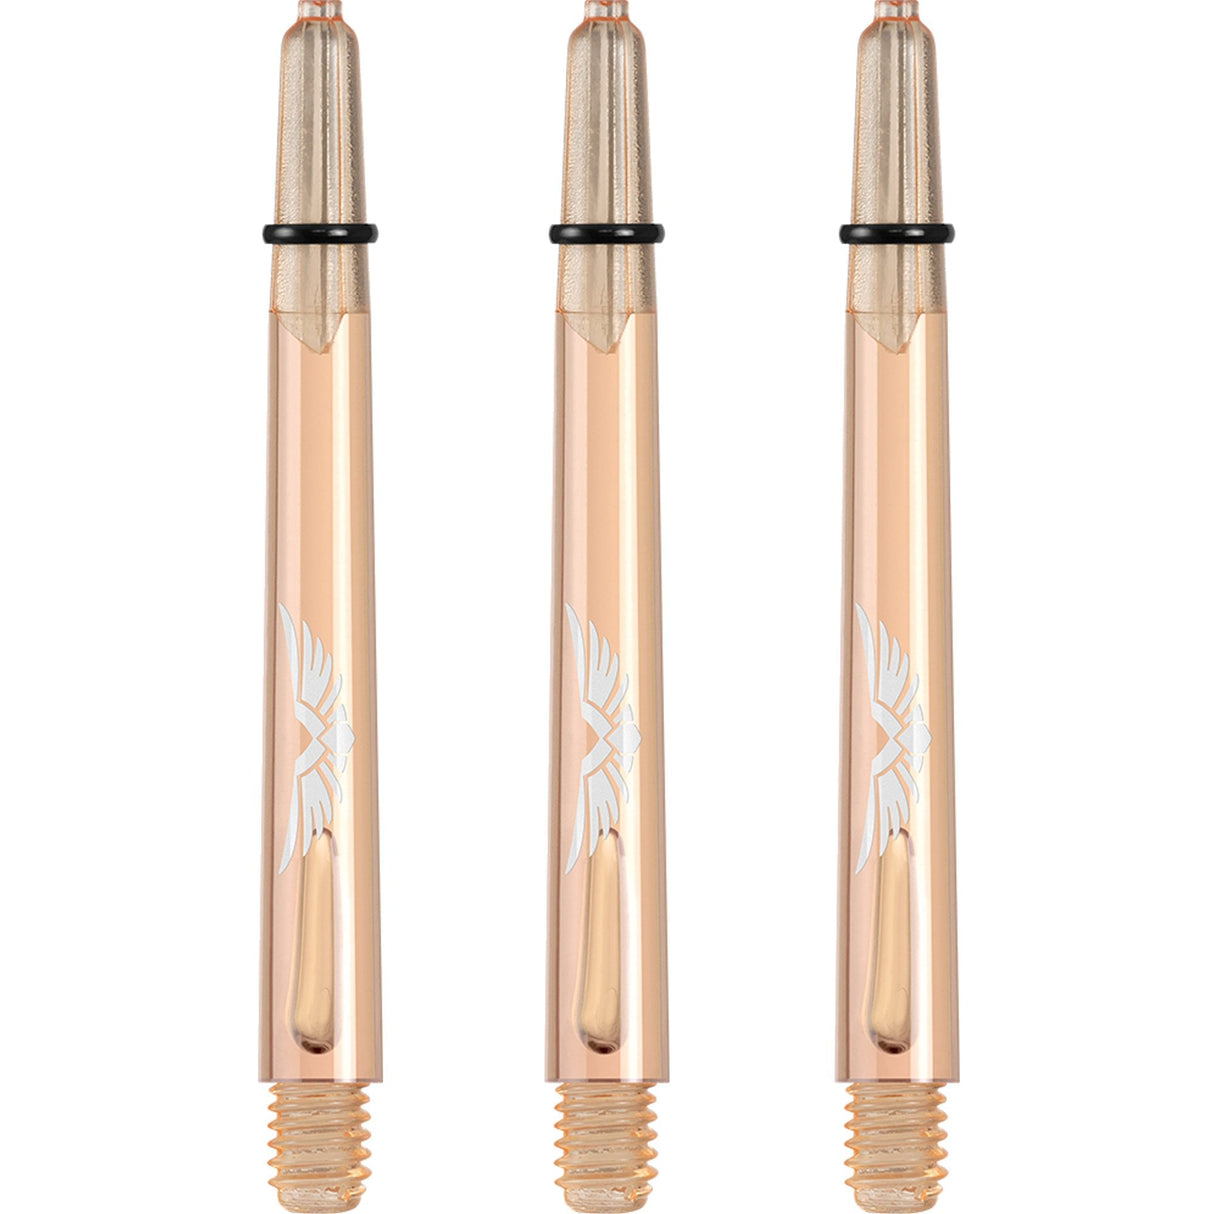 Shot Eagle Claw Dart Shafts - with Machined Rings - Strong Polycarbonate Stems - Copper Orange